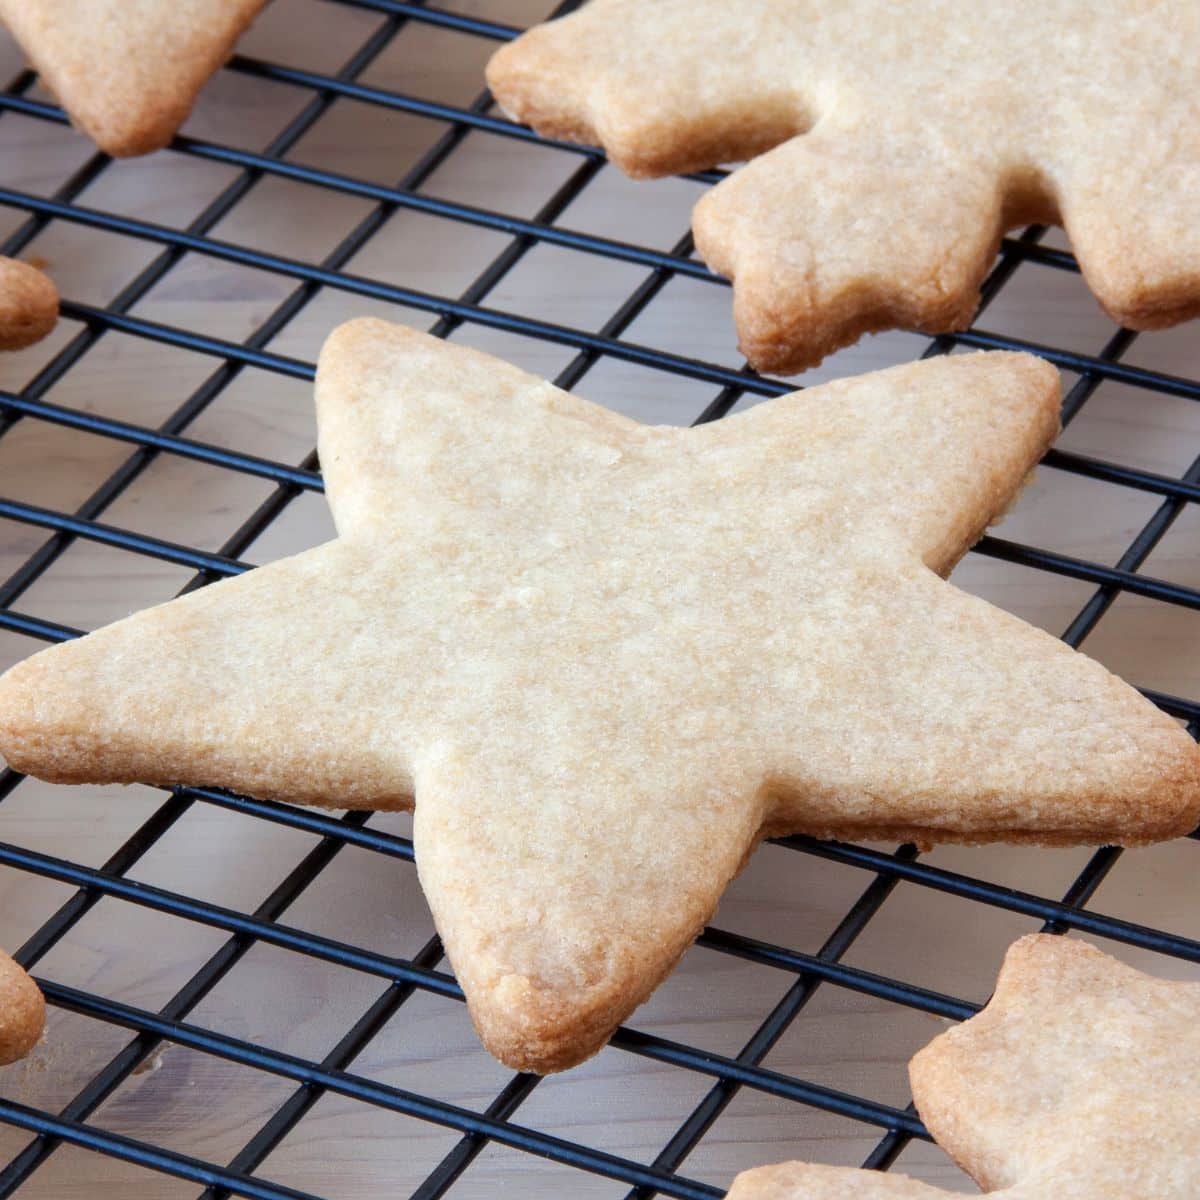 Square image of baked star shaped sugar cookies on a cooling rack.